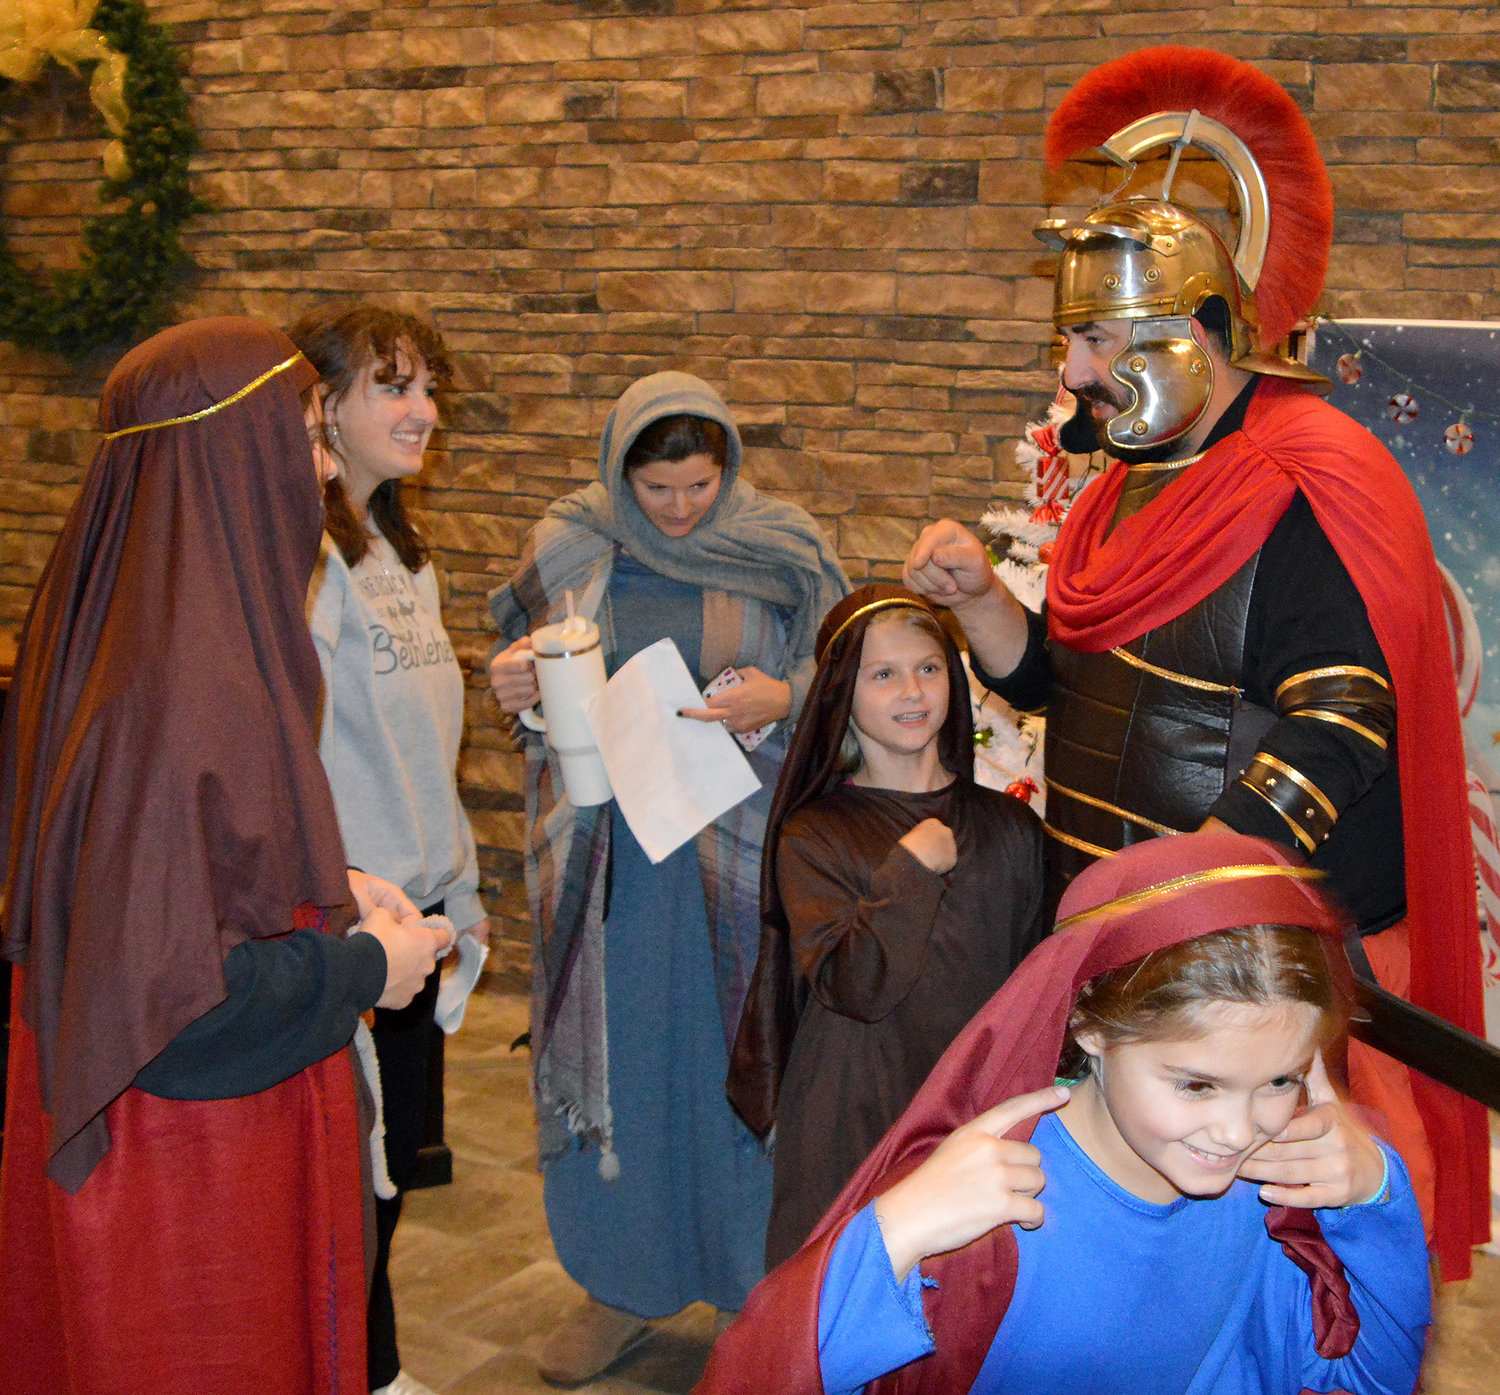 Tyler Kendall rehearses his lines as a Roman soldier in the Legacy of Bethlehem production at Legacy Baptist Church in Dallas, Ga., Monday, Dec. 5, 2022. The dress rehearsal was held indoors due to the rain. (Index/Henry Durand)